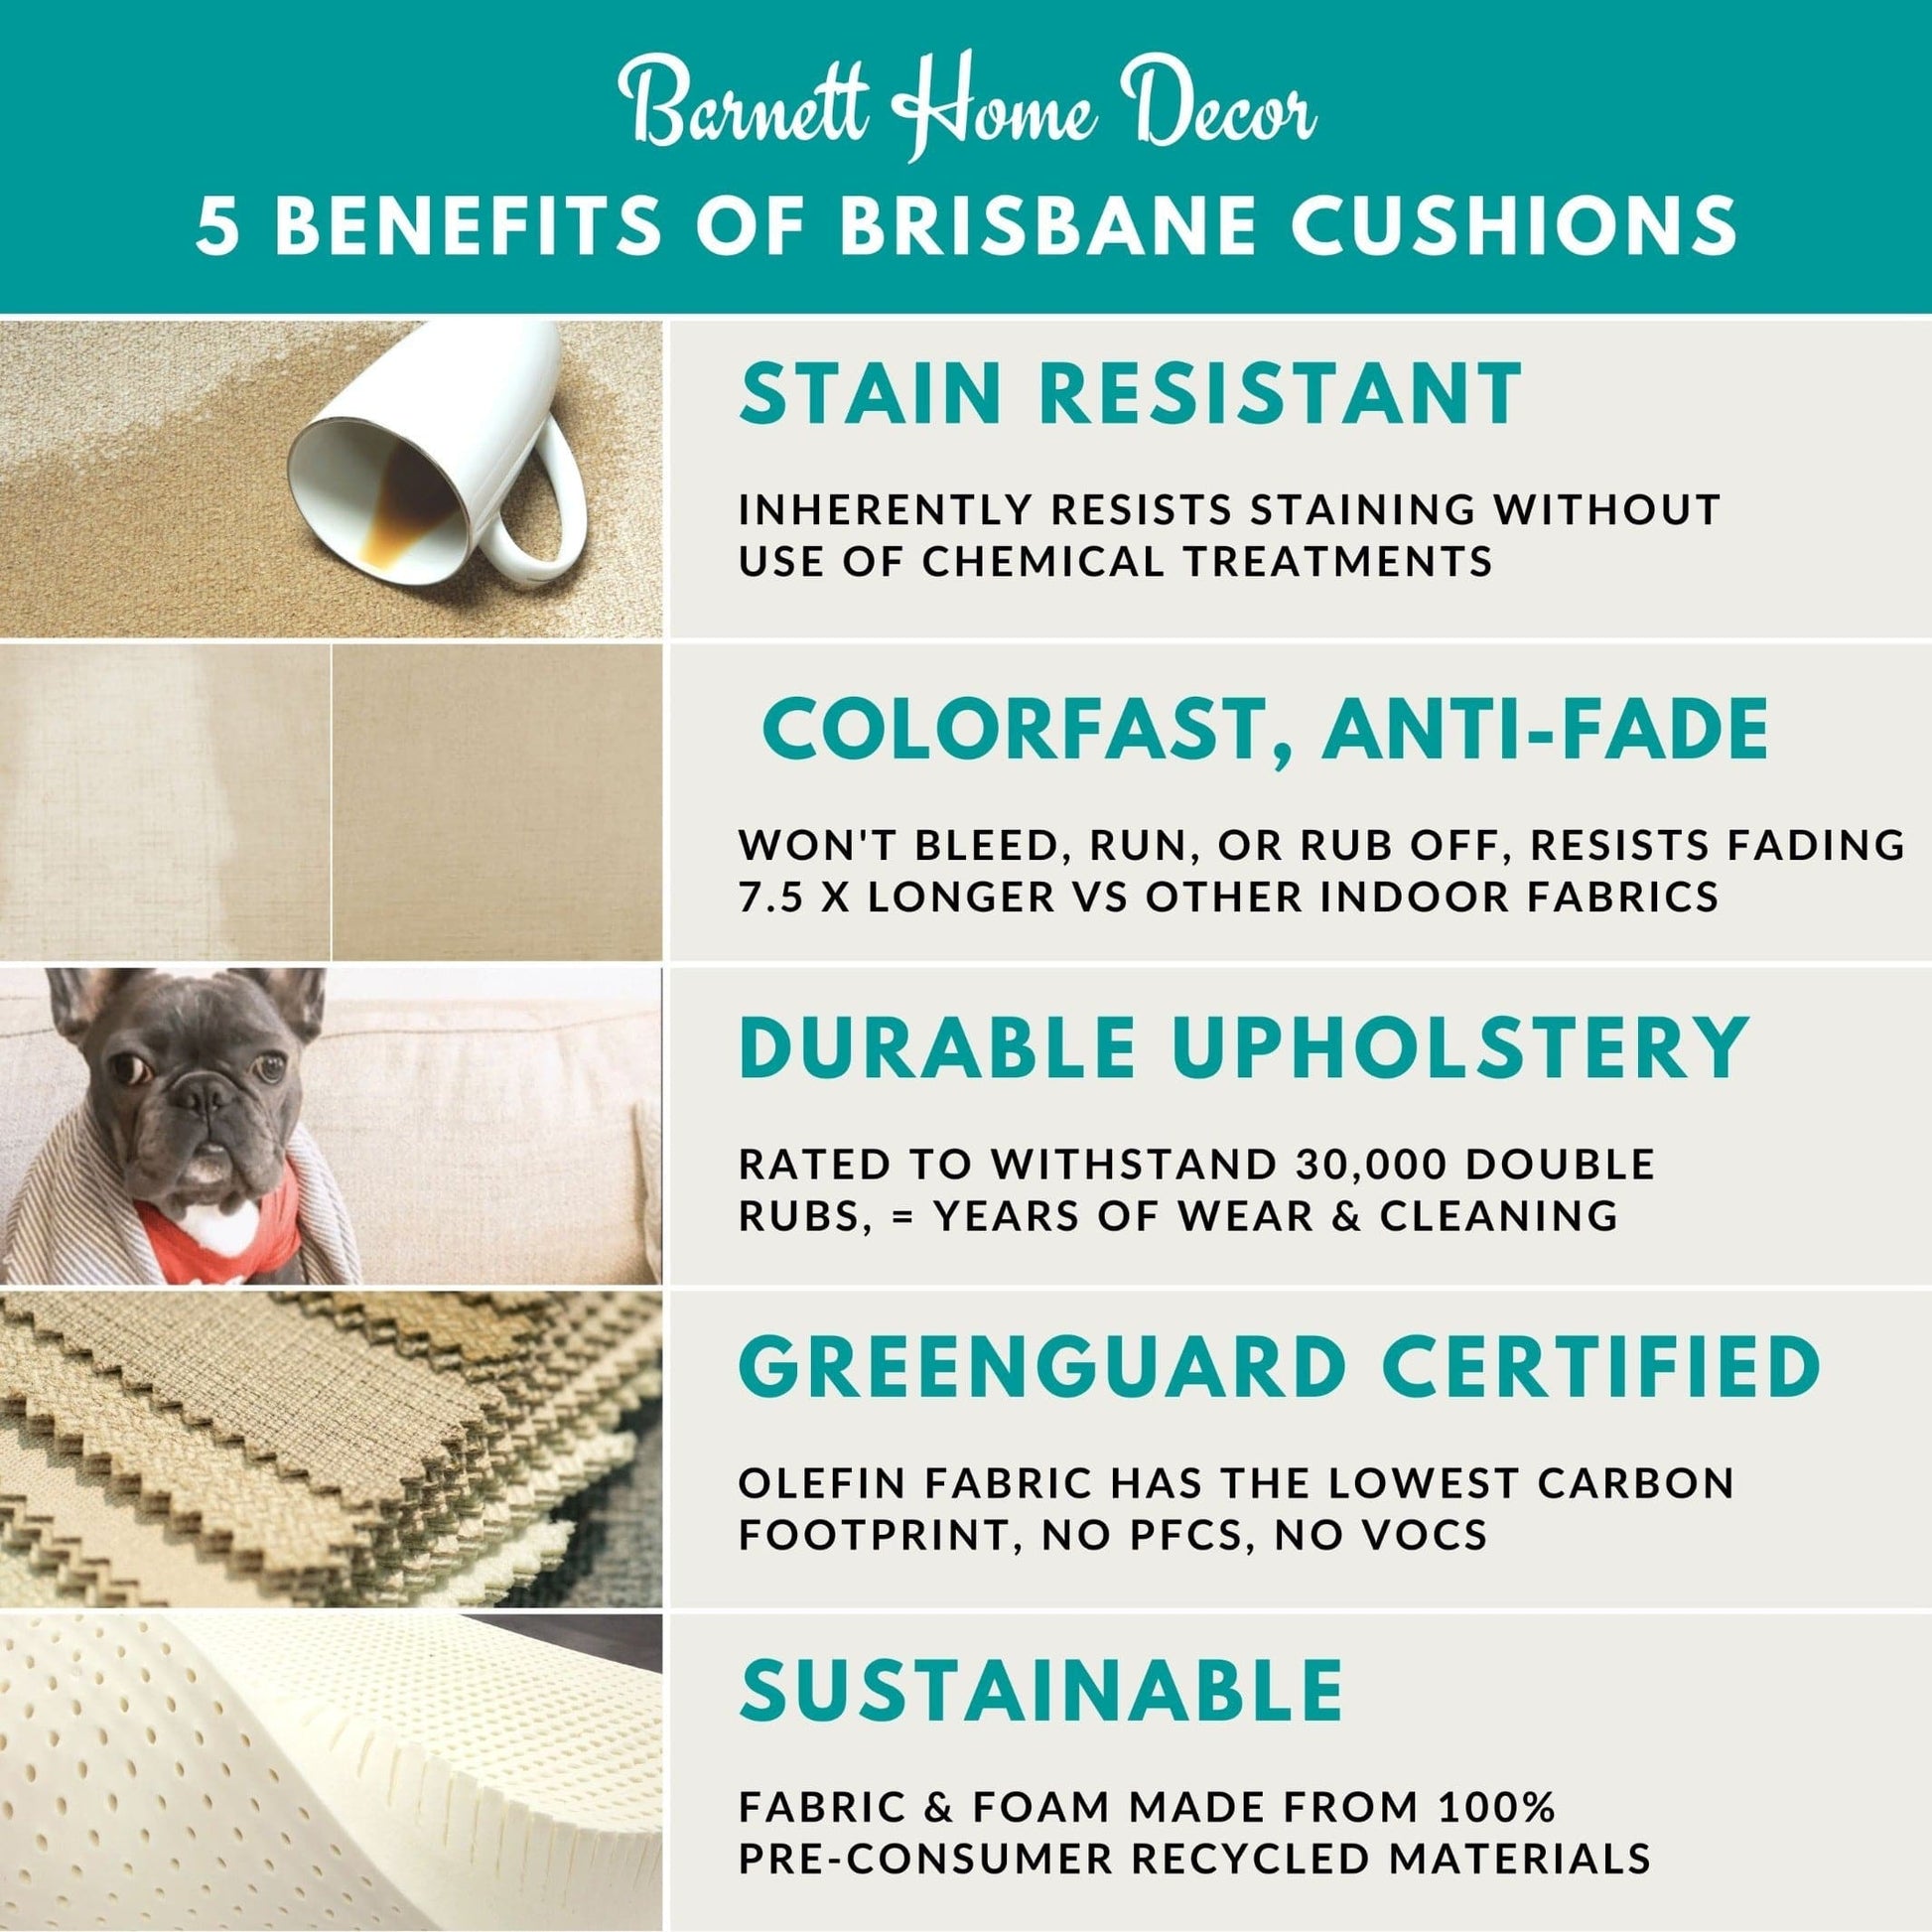 Barnett Home Decor Benefits of Brisbane Cushions Stain Resistant, Anti-Fade,  Durable Upholstery, Greenguard Certified, Sustainable